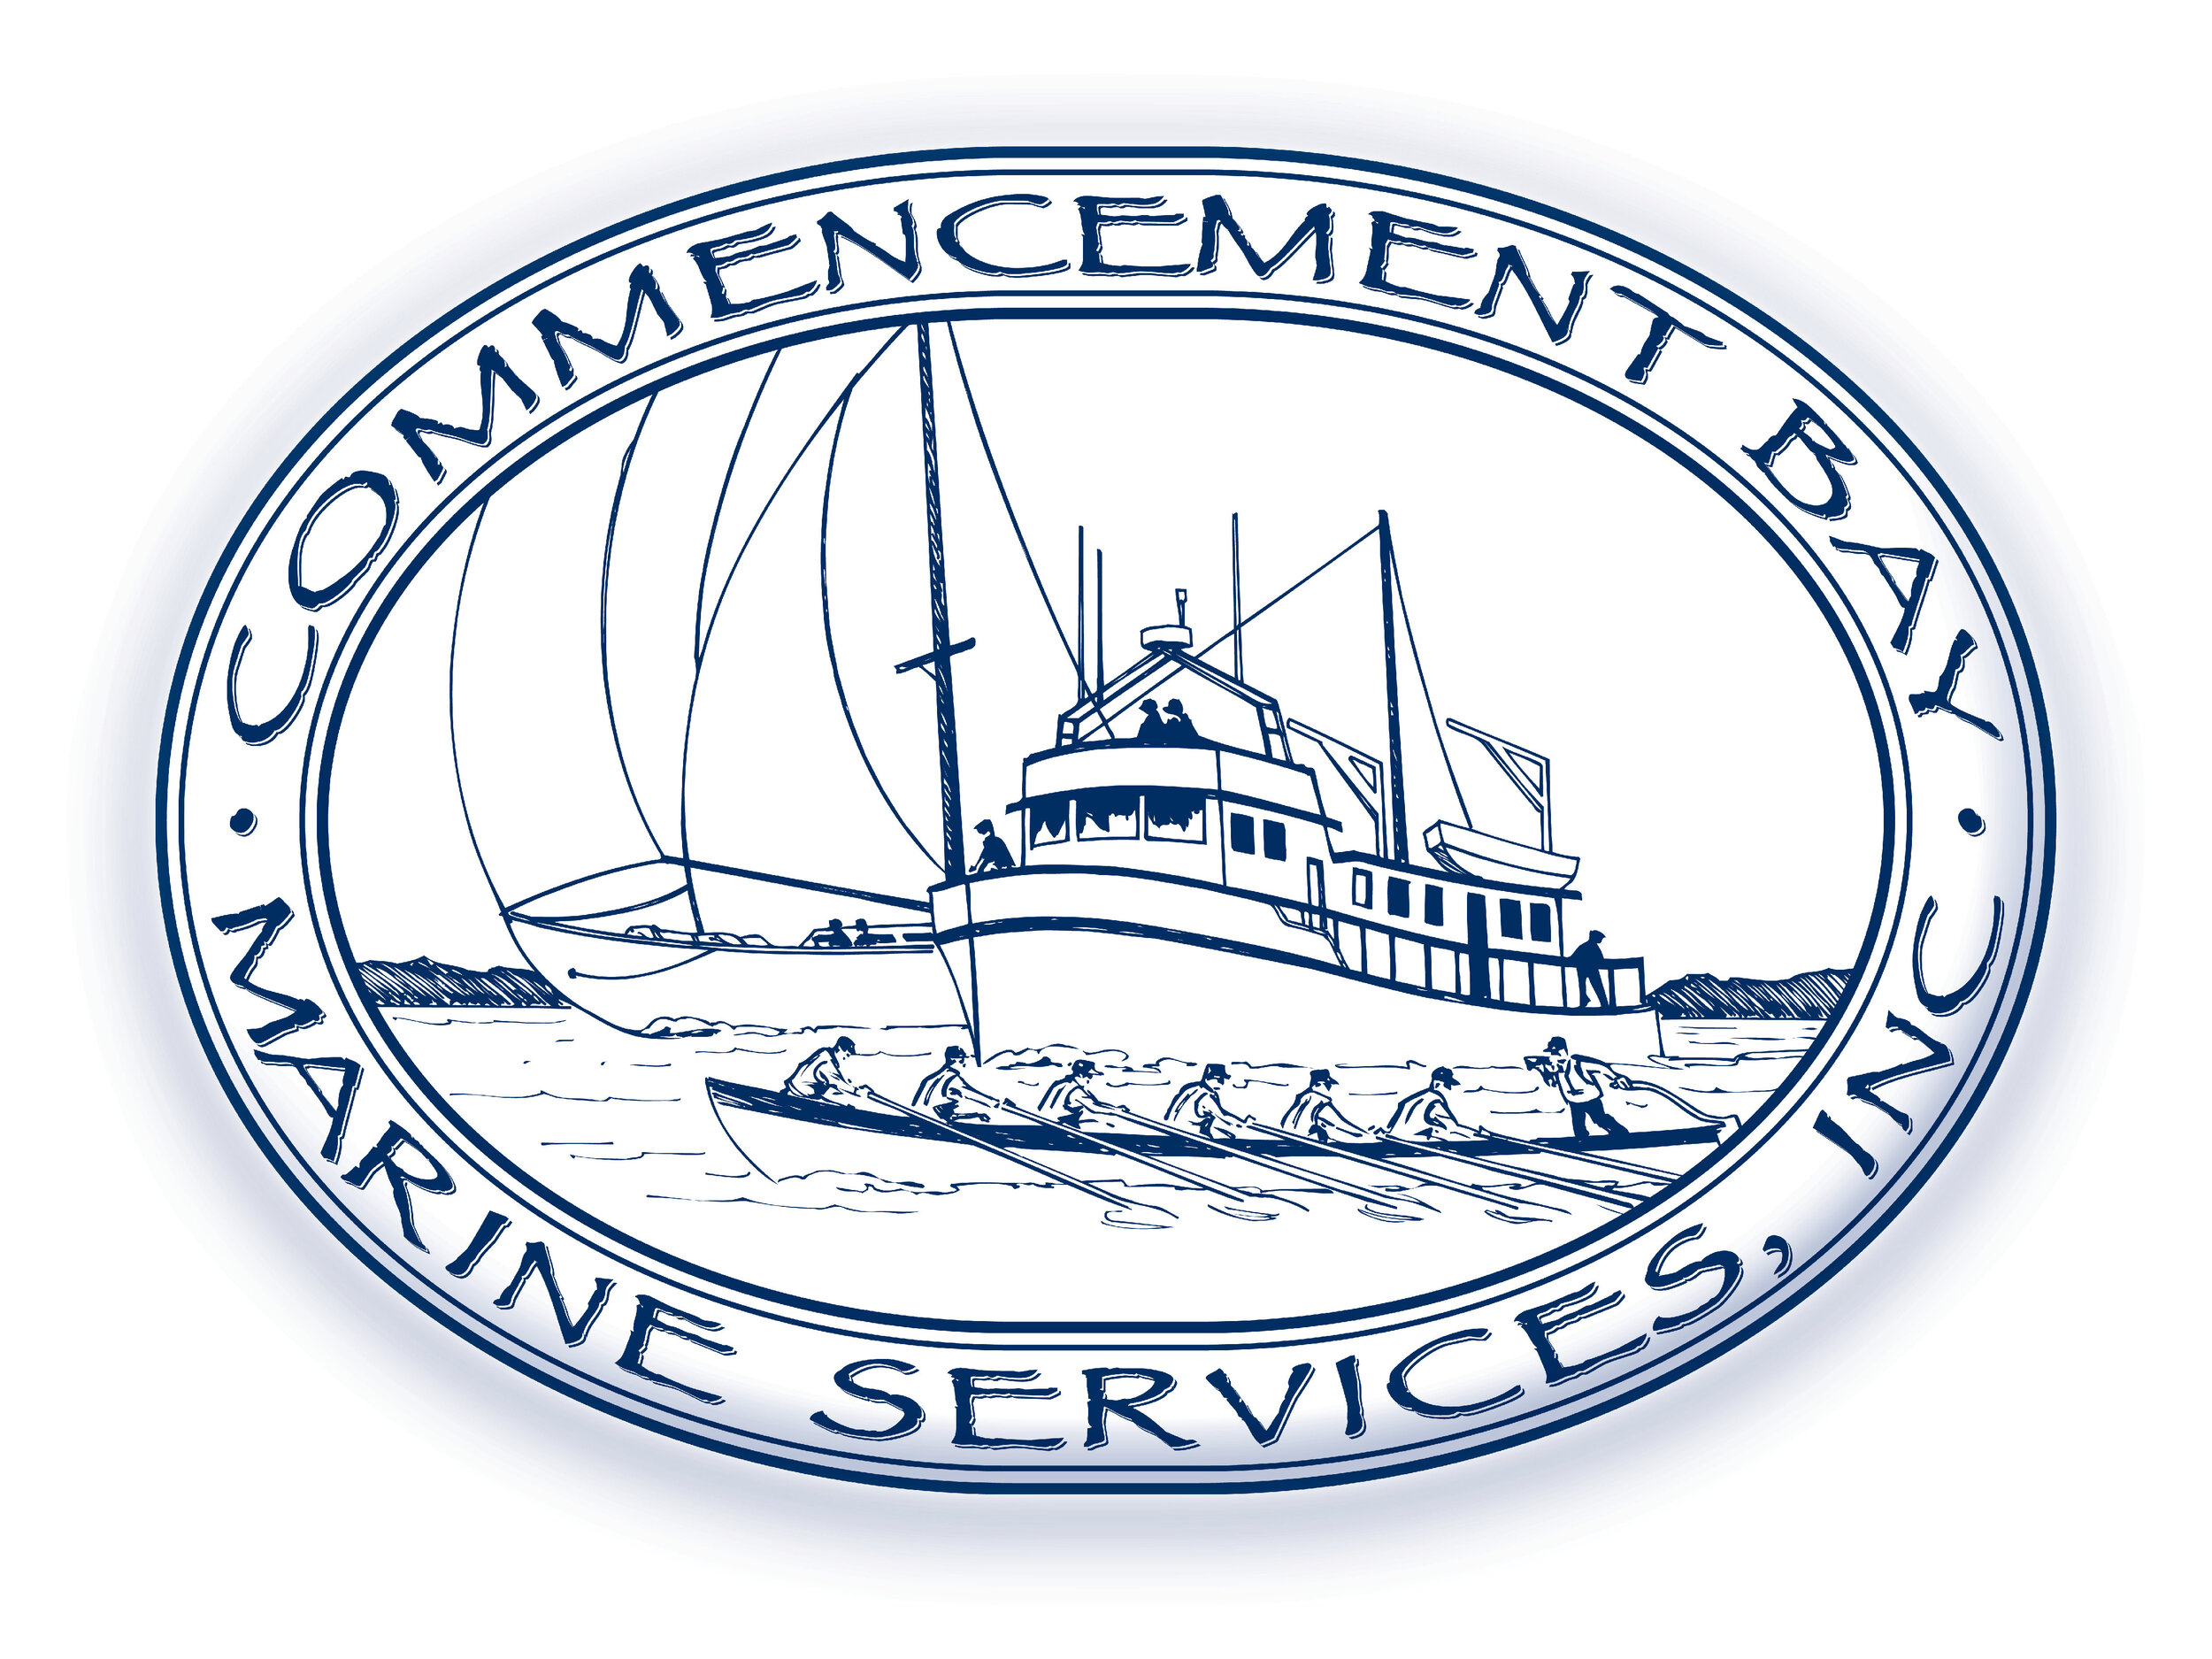 Commencement Bay Marine Services